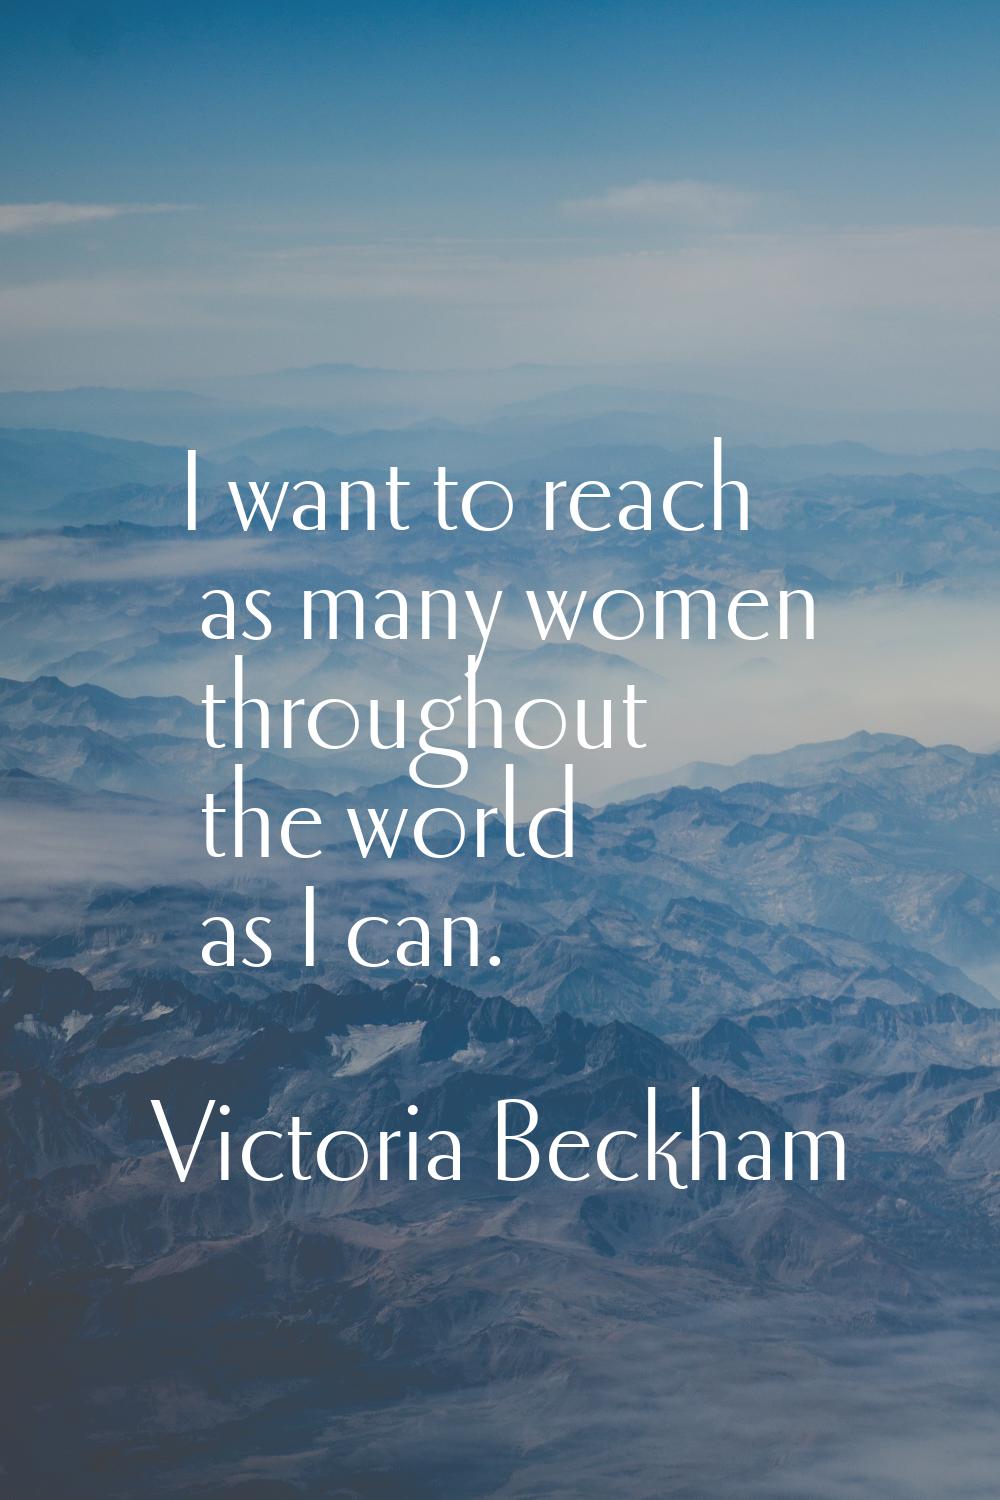 I want to reach as many women throughout the world as I can.